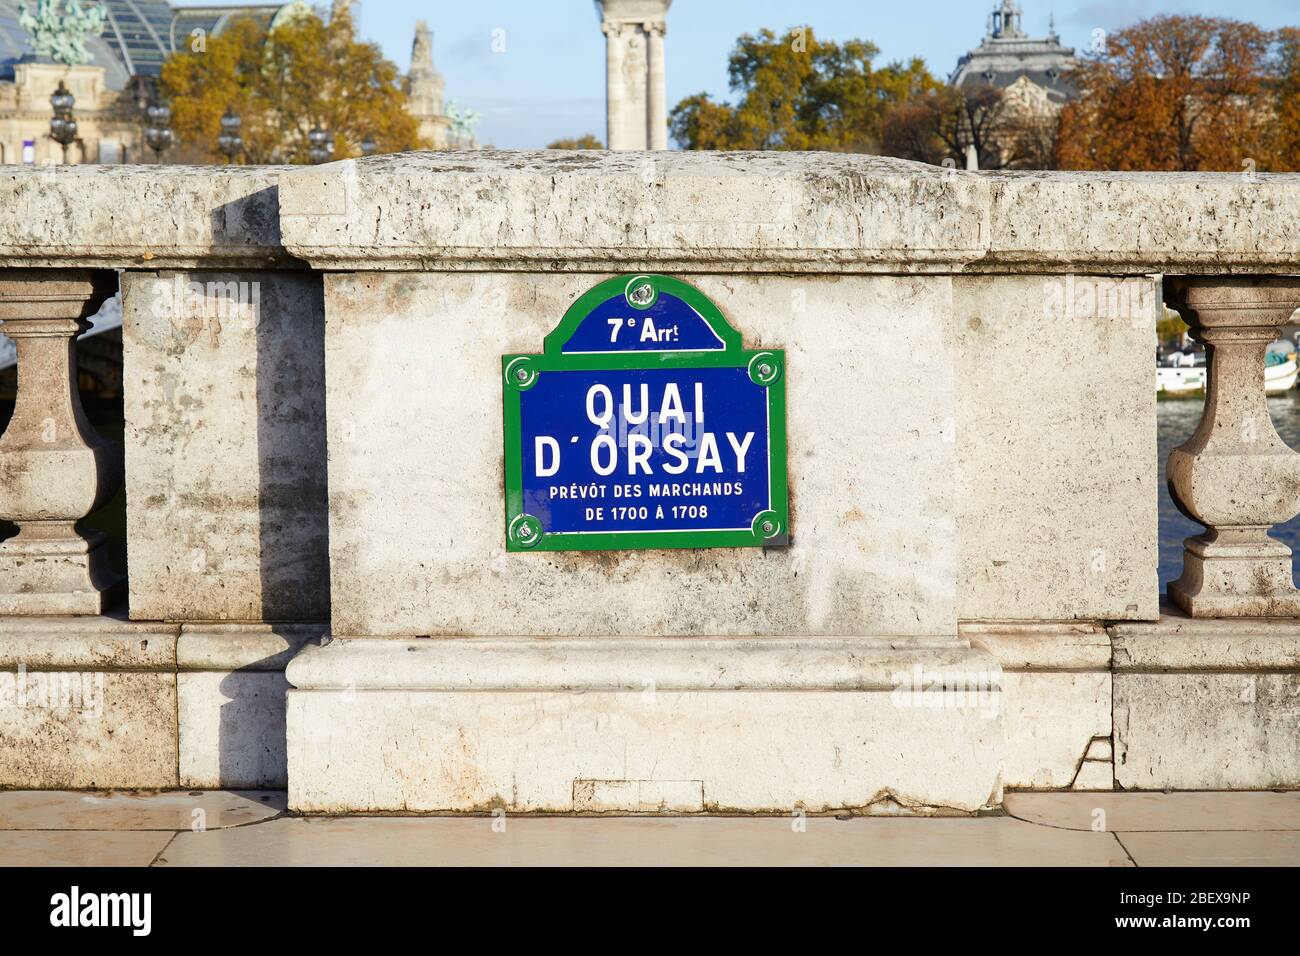 Quai Orsay typical street sign and stone balustrade in Paris, France Stock Photo